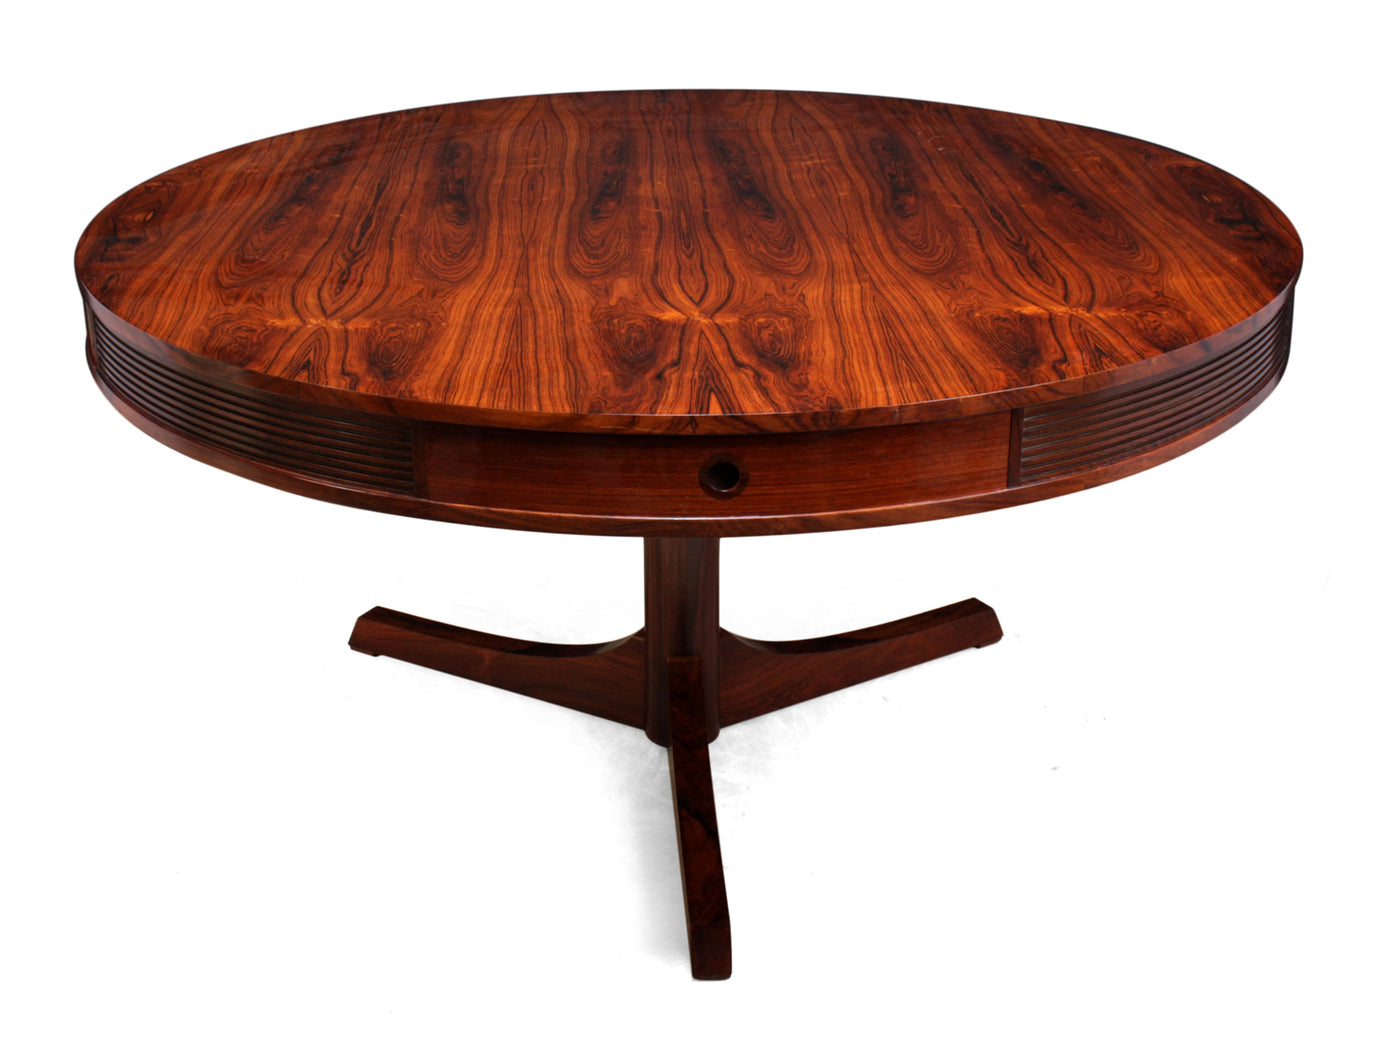 Rosewood Drum Table by Robert Heritage for Archie shine c1957